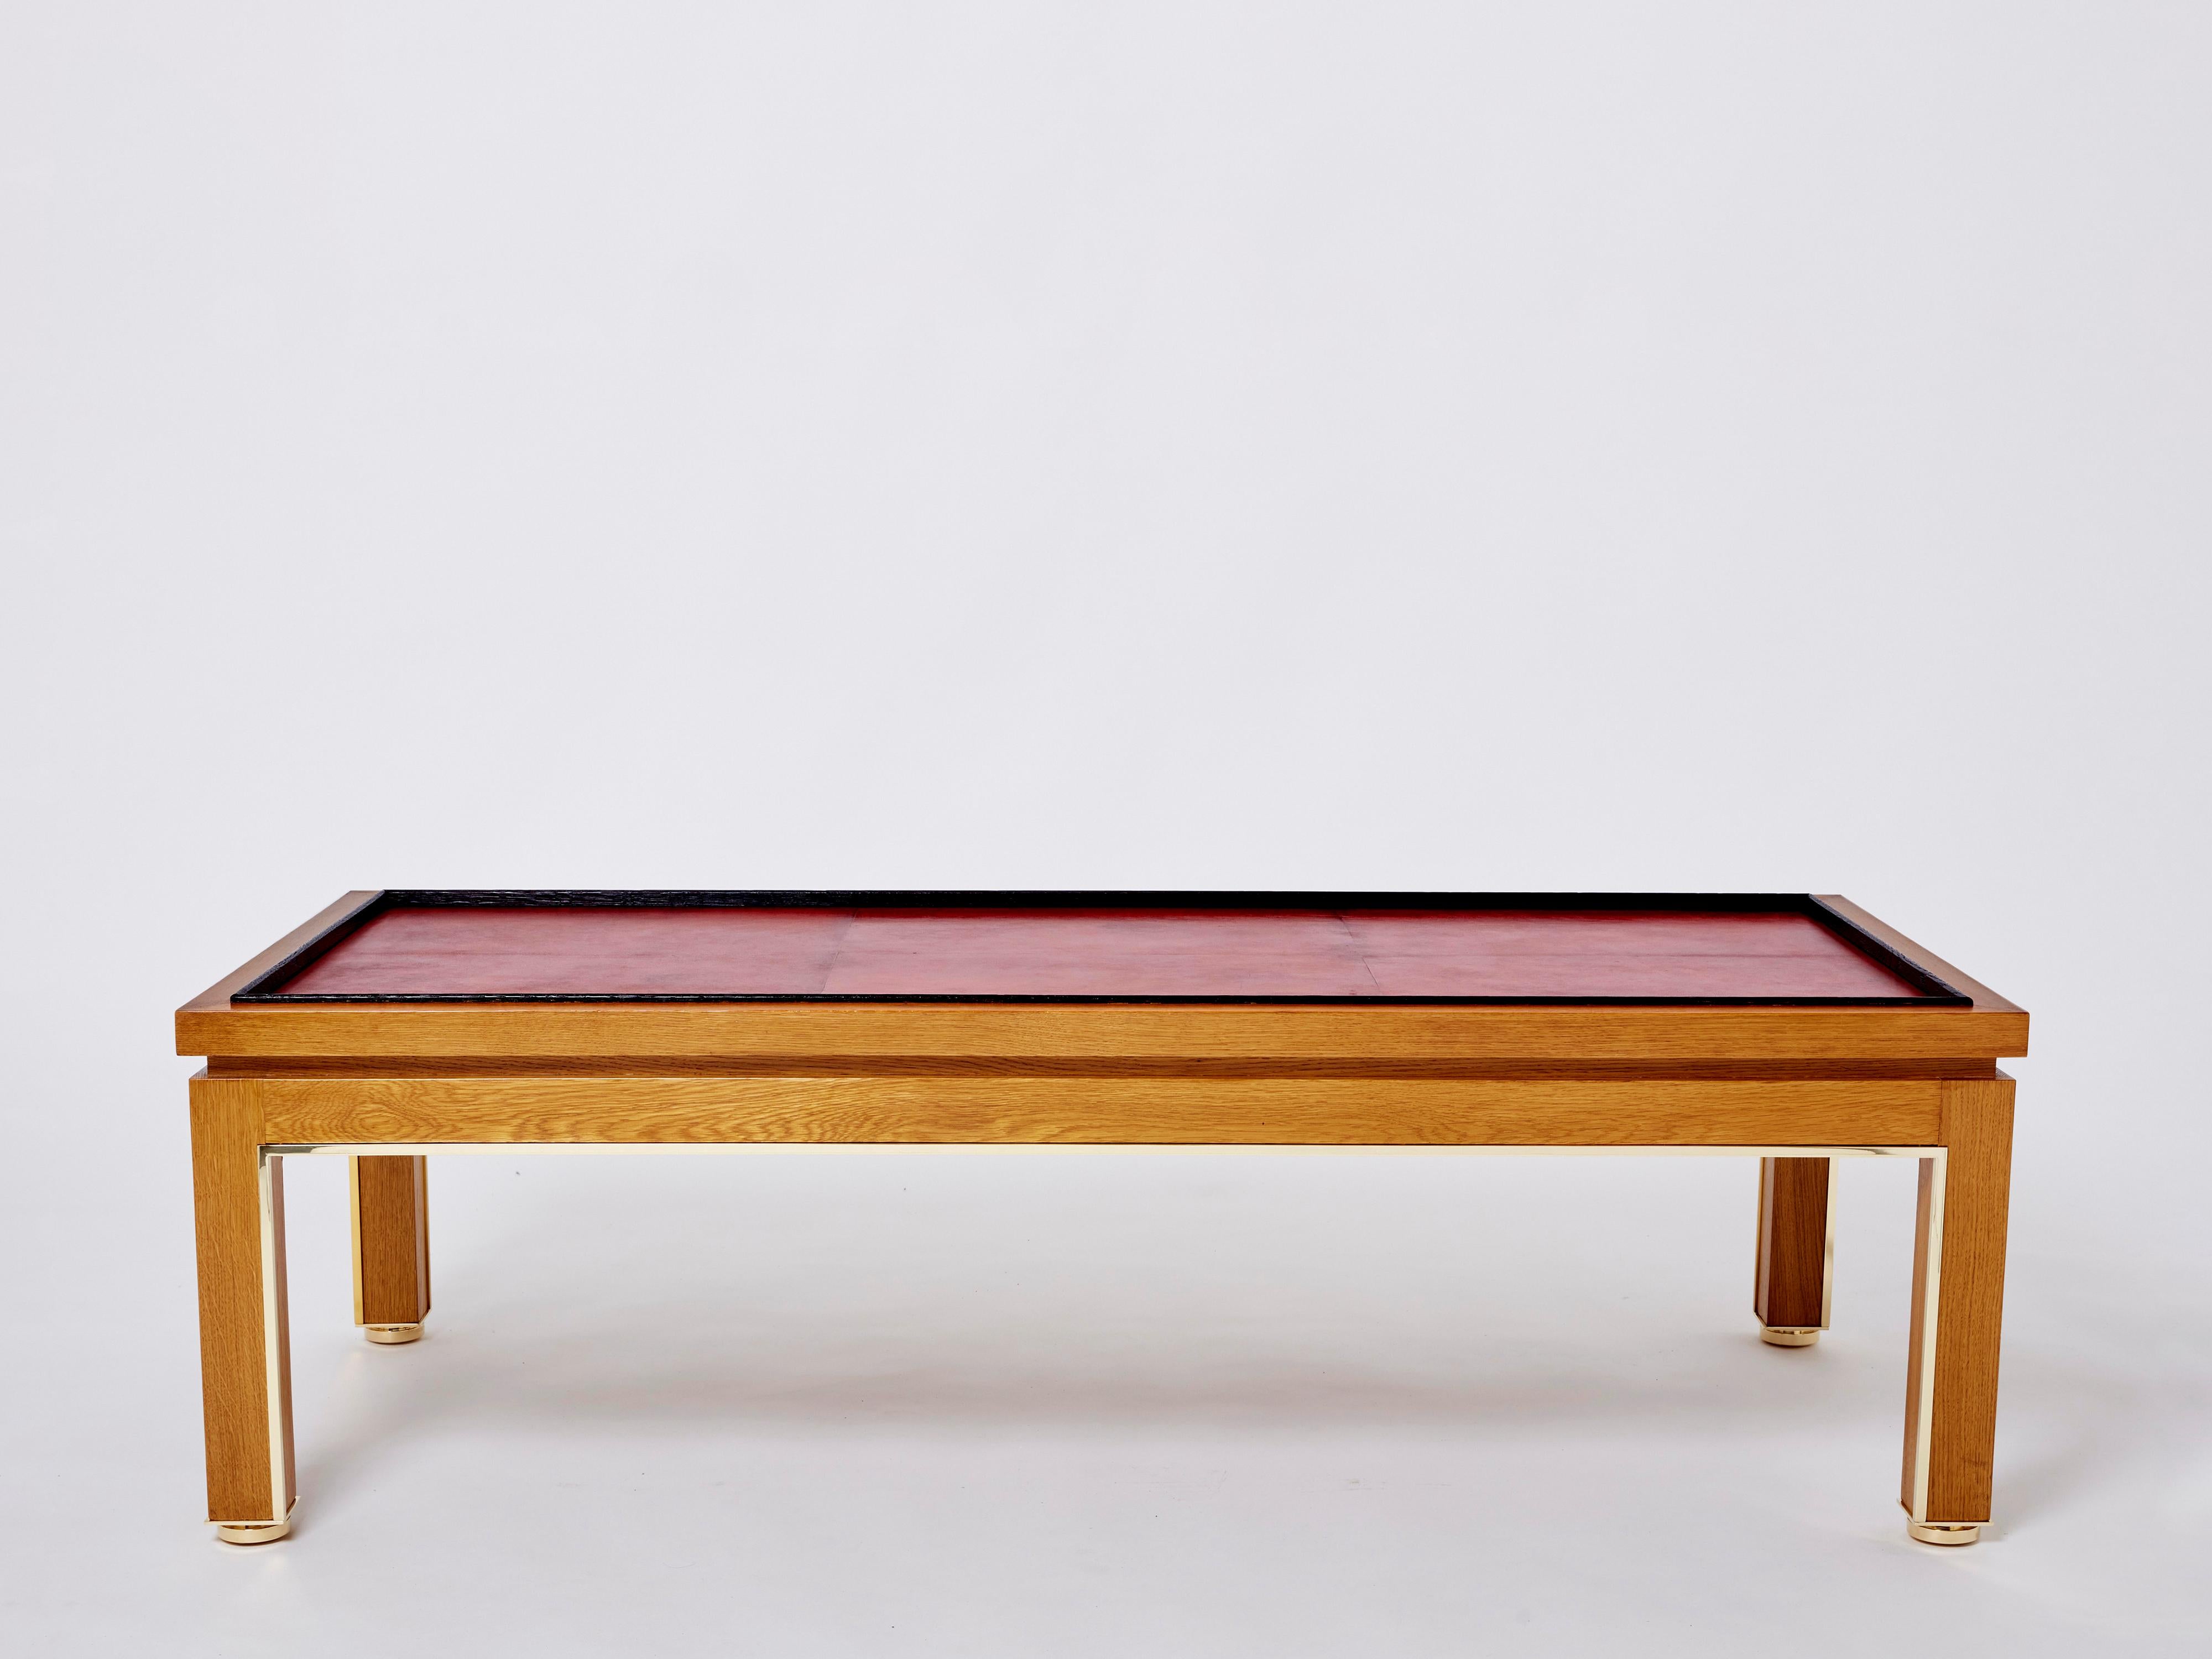 Unique coffee table commissioned by Alberto Pinto in the 1990s for the decors of an hotel particulier in Paris 16ème, inspired by a Paul Dupré-Lafon coffee table design. This piece is an exquisite example of refined, highly detailed and very well